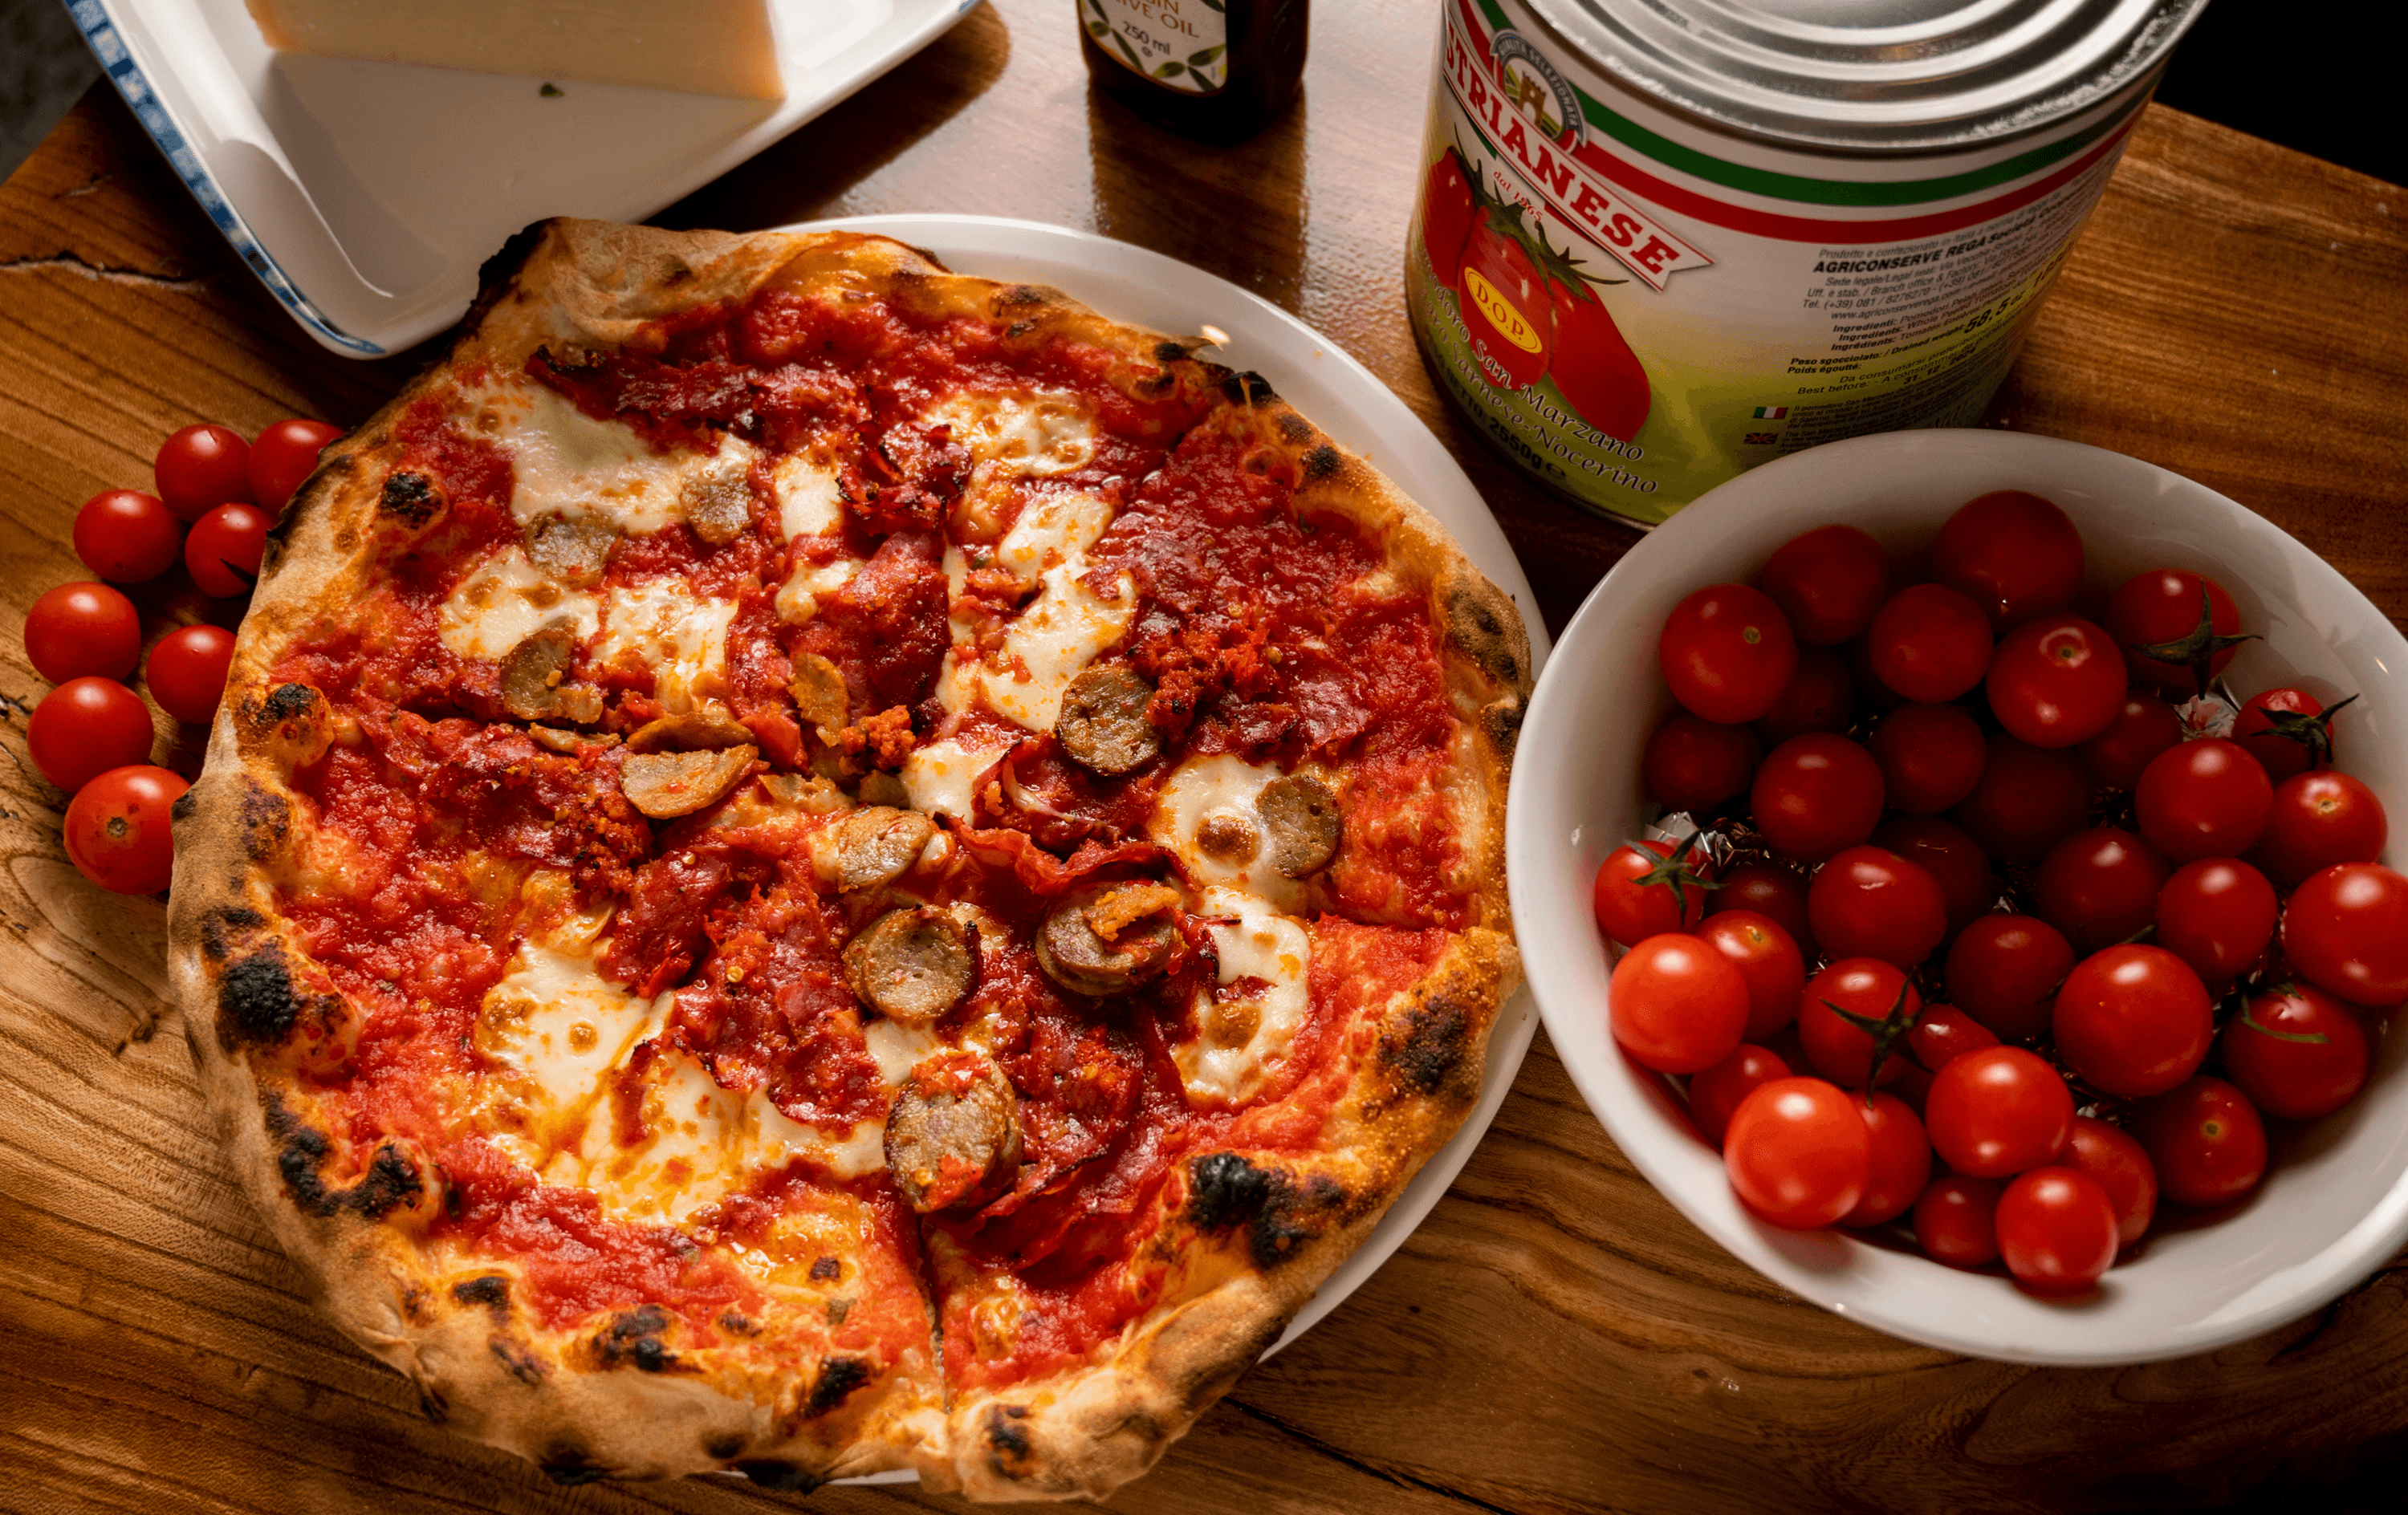 A rustic pizza from Code, considered one of Melbourne's best pizzas.